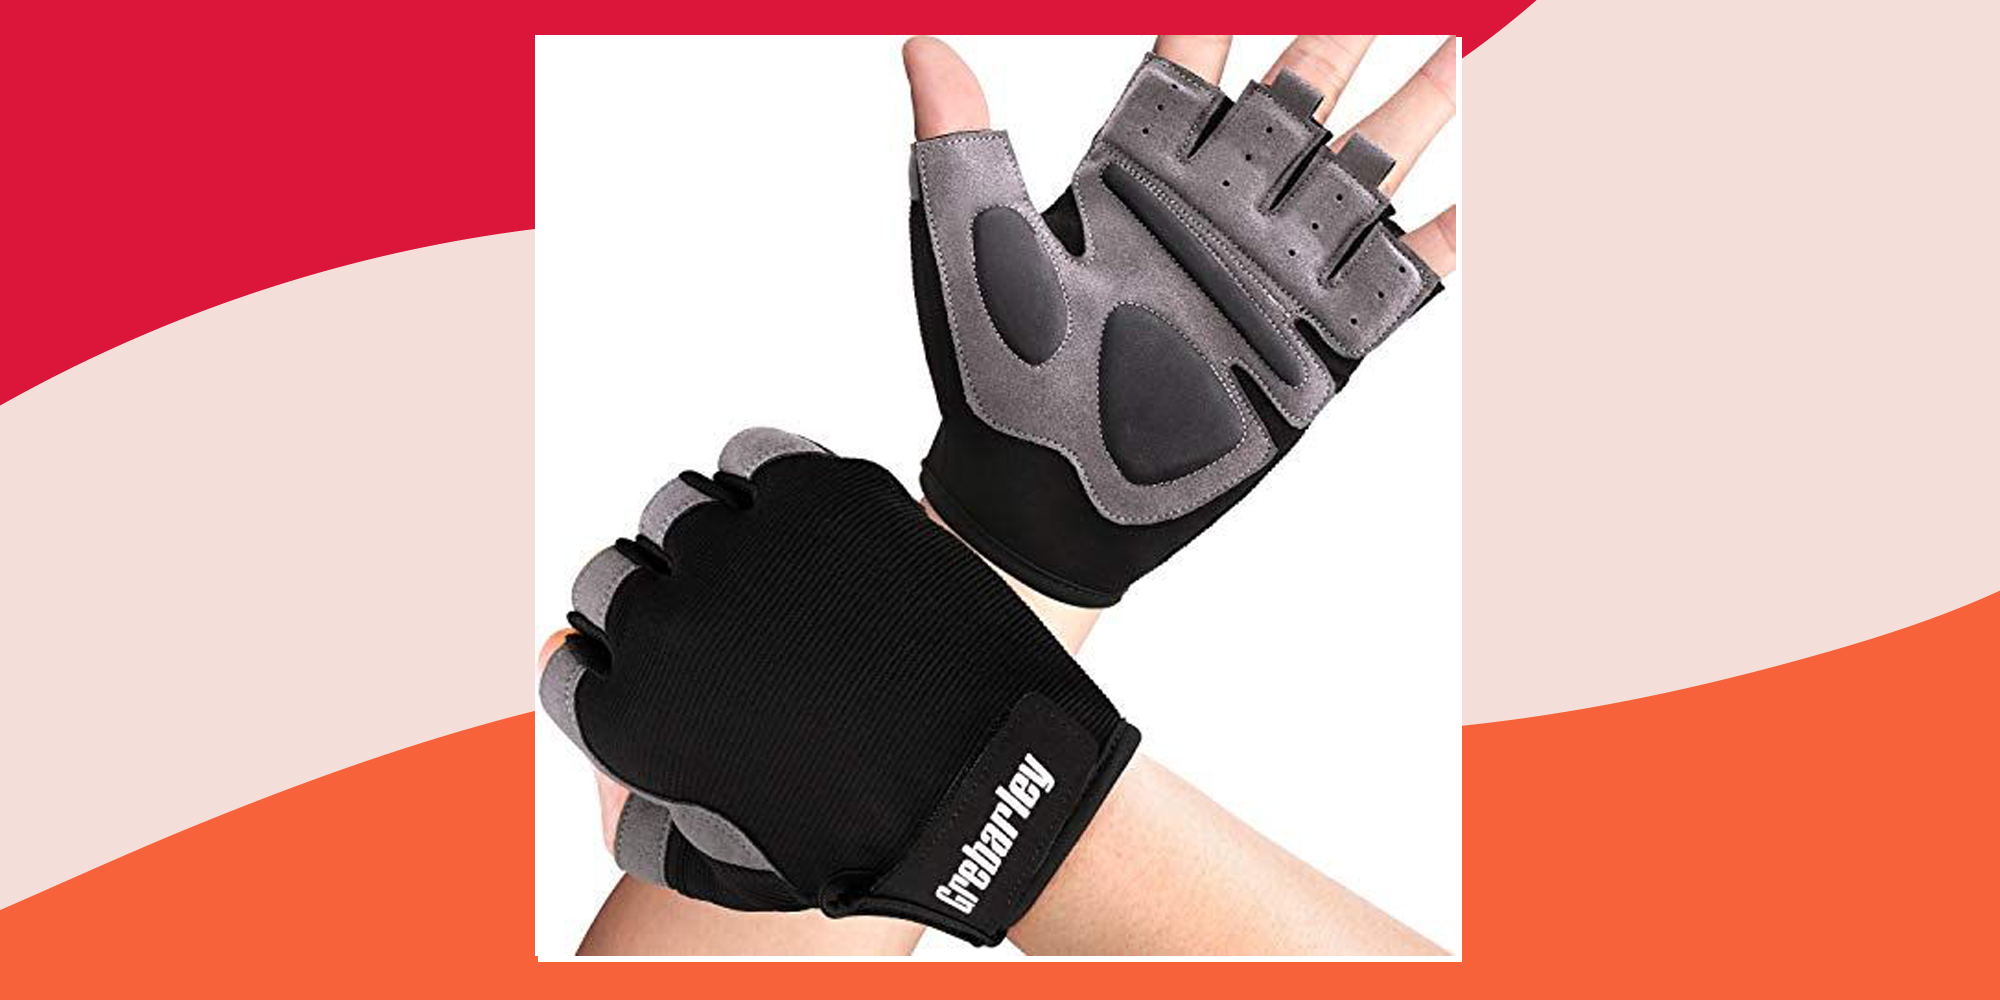 Fitness HIIT Workout Bodybuilding Powerlifting Strength Training Cycling Hanging Pull ups Exercise Home Gym Equipment Breathable Gel Padded Anti Slip Full Palm Protection RDX Weight Lifting Gloves